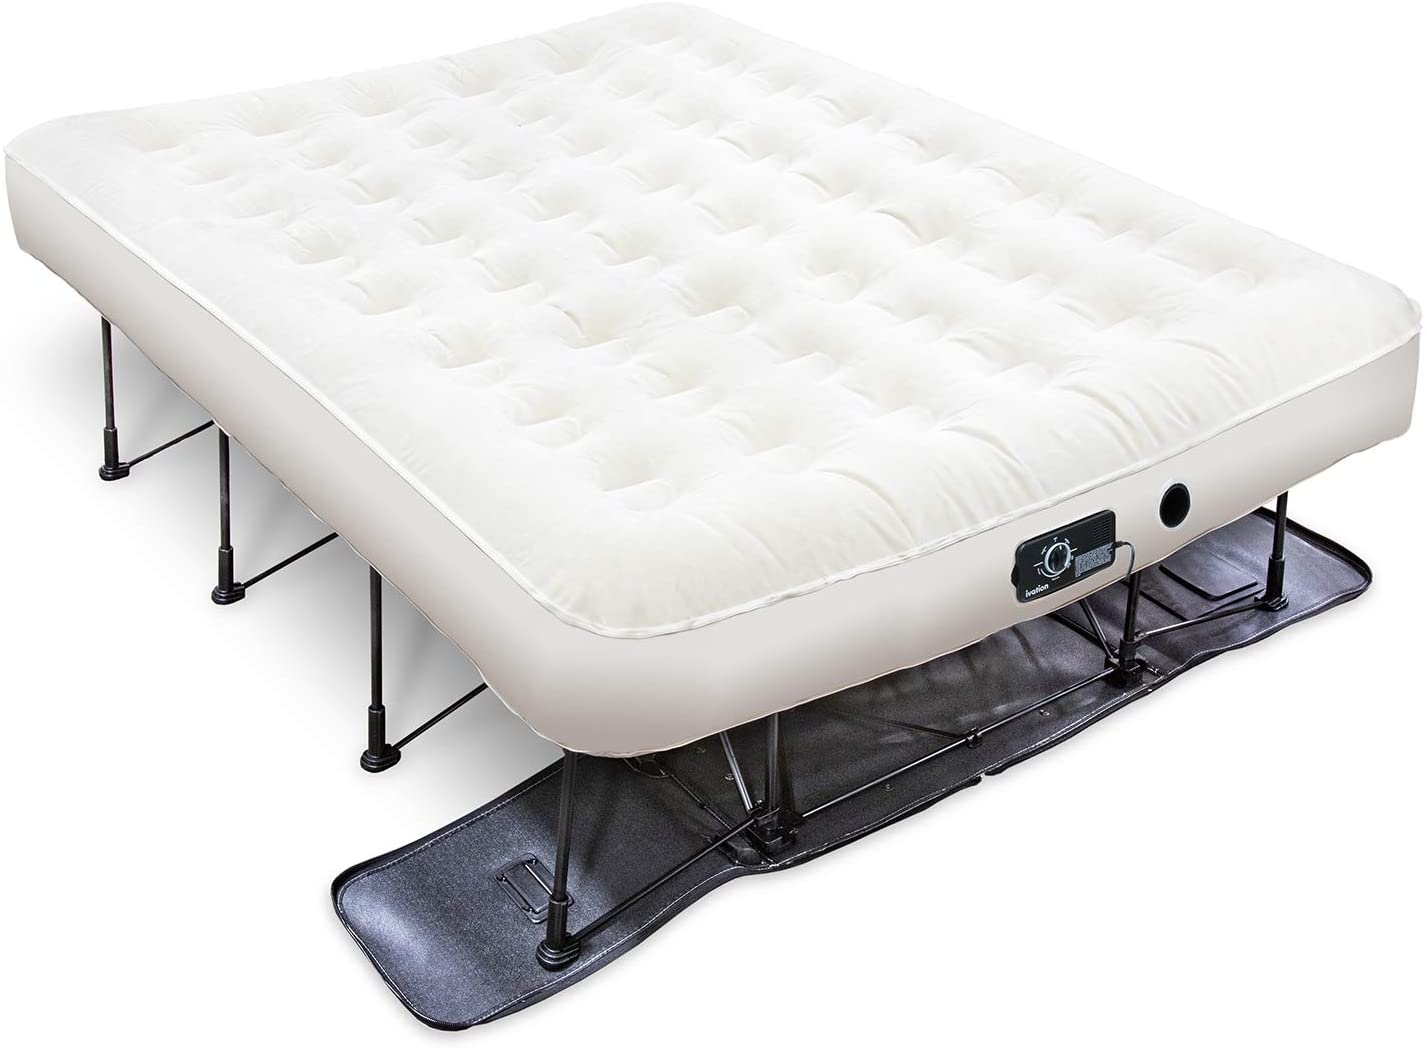 Ivation EZ-Bed Queen Size Double High Air Mattress with Internal Pump -  Waterproof PVC Material - Self-Deploying Frame - Compact & Comfortable in  the Air Mattresses department at